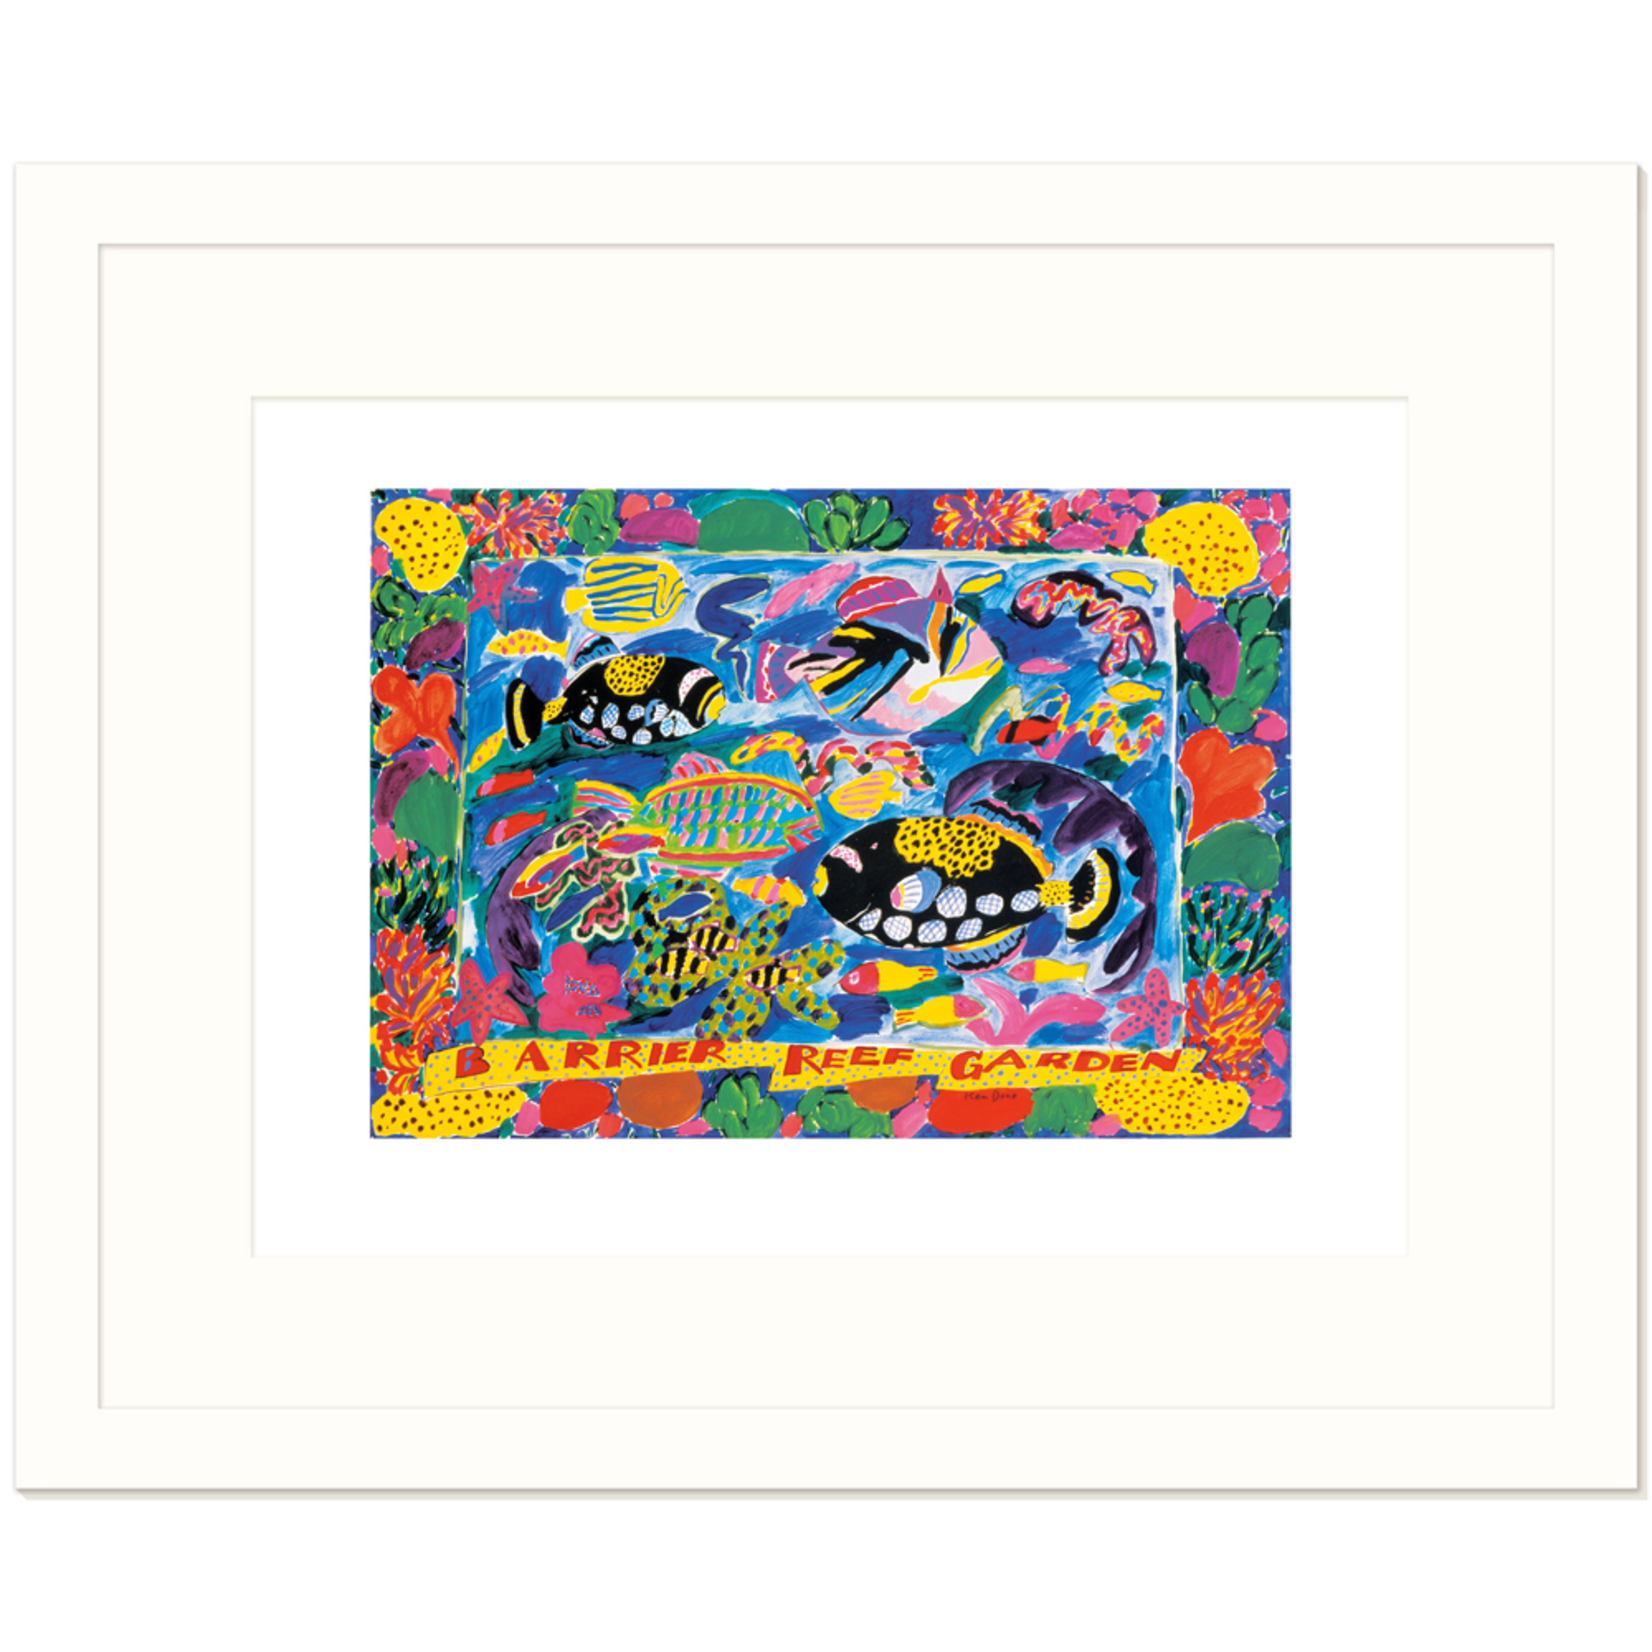 Limited Edition Prints Barrier Reef garden, 1984